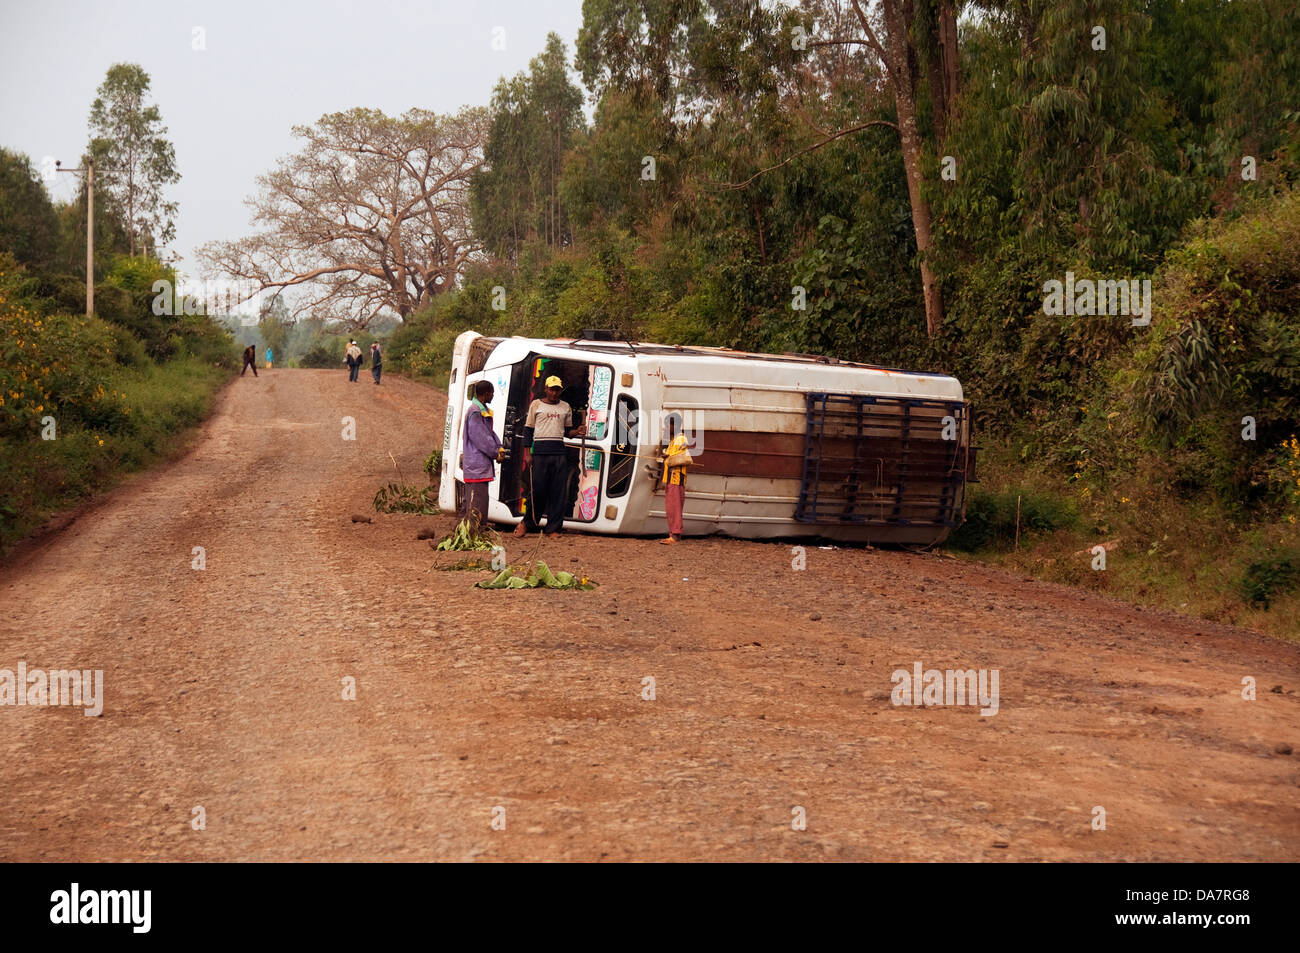 A road accident involving a bus on a dirty road, Ethiopia Stock Photo